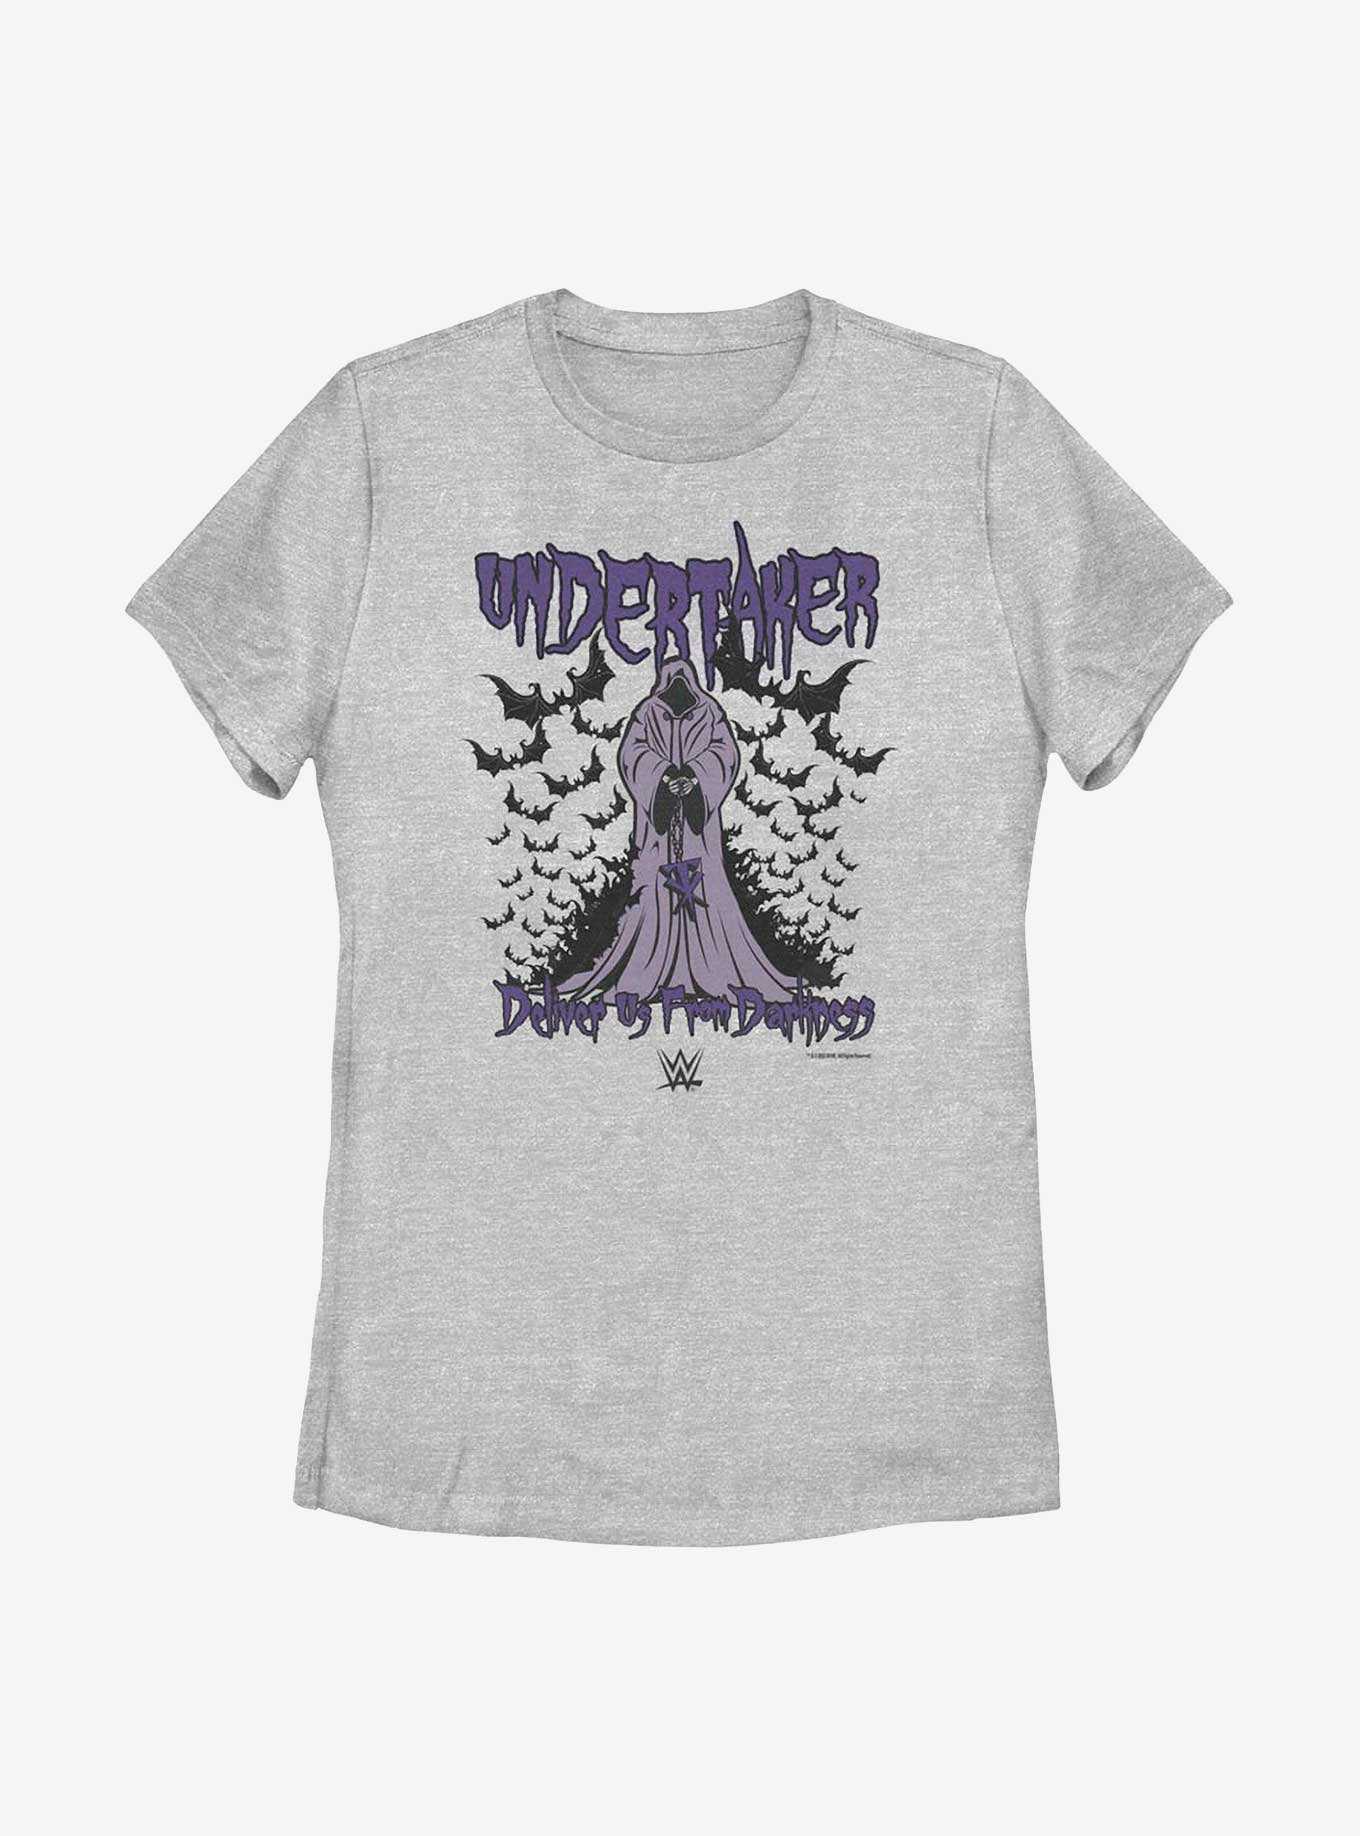 WWE The Undertaker Deliver Us From Darkness Womens T-Shirt, , hi-res